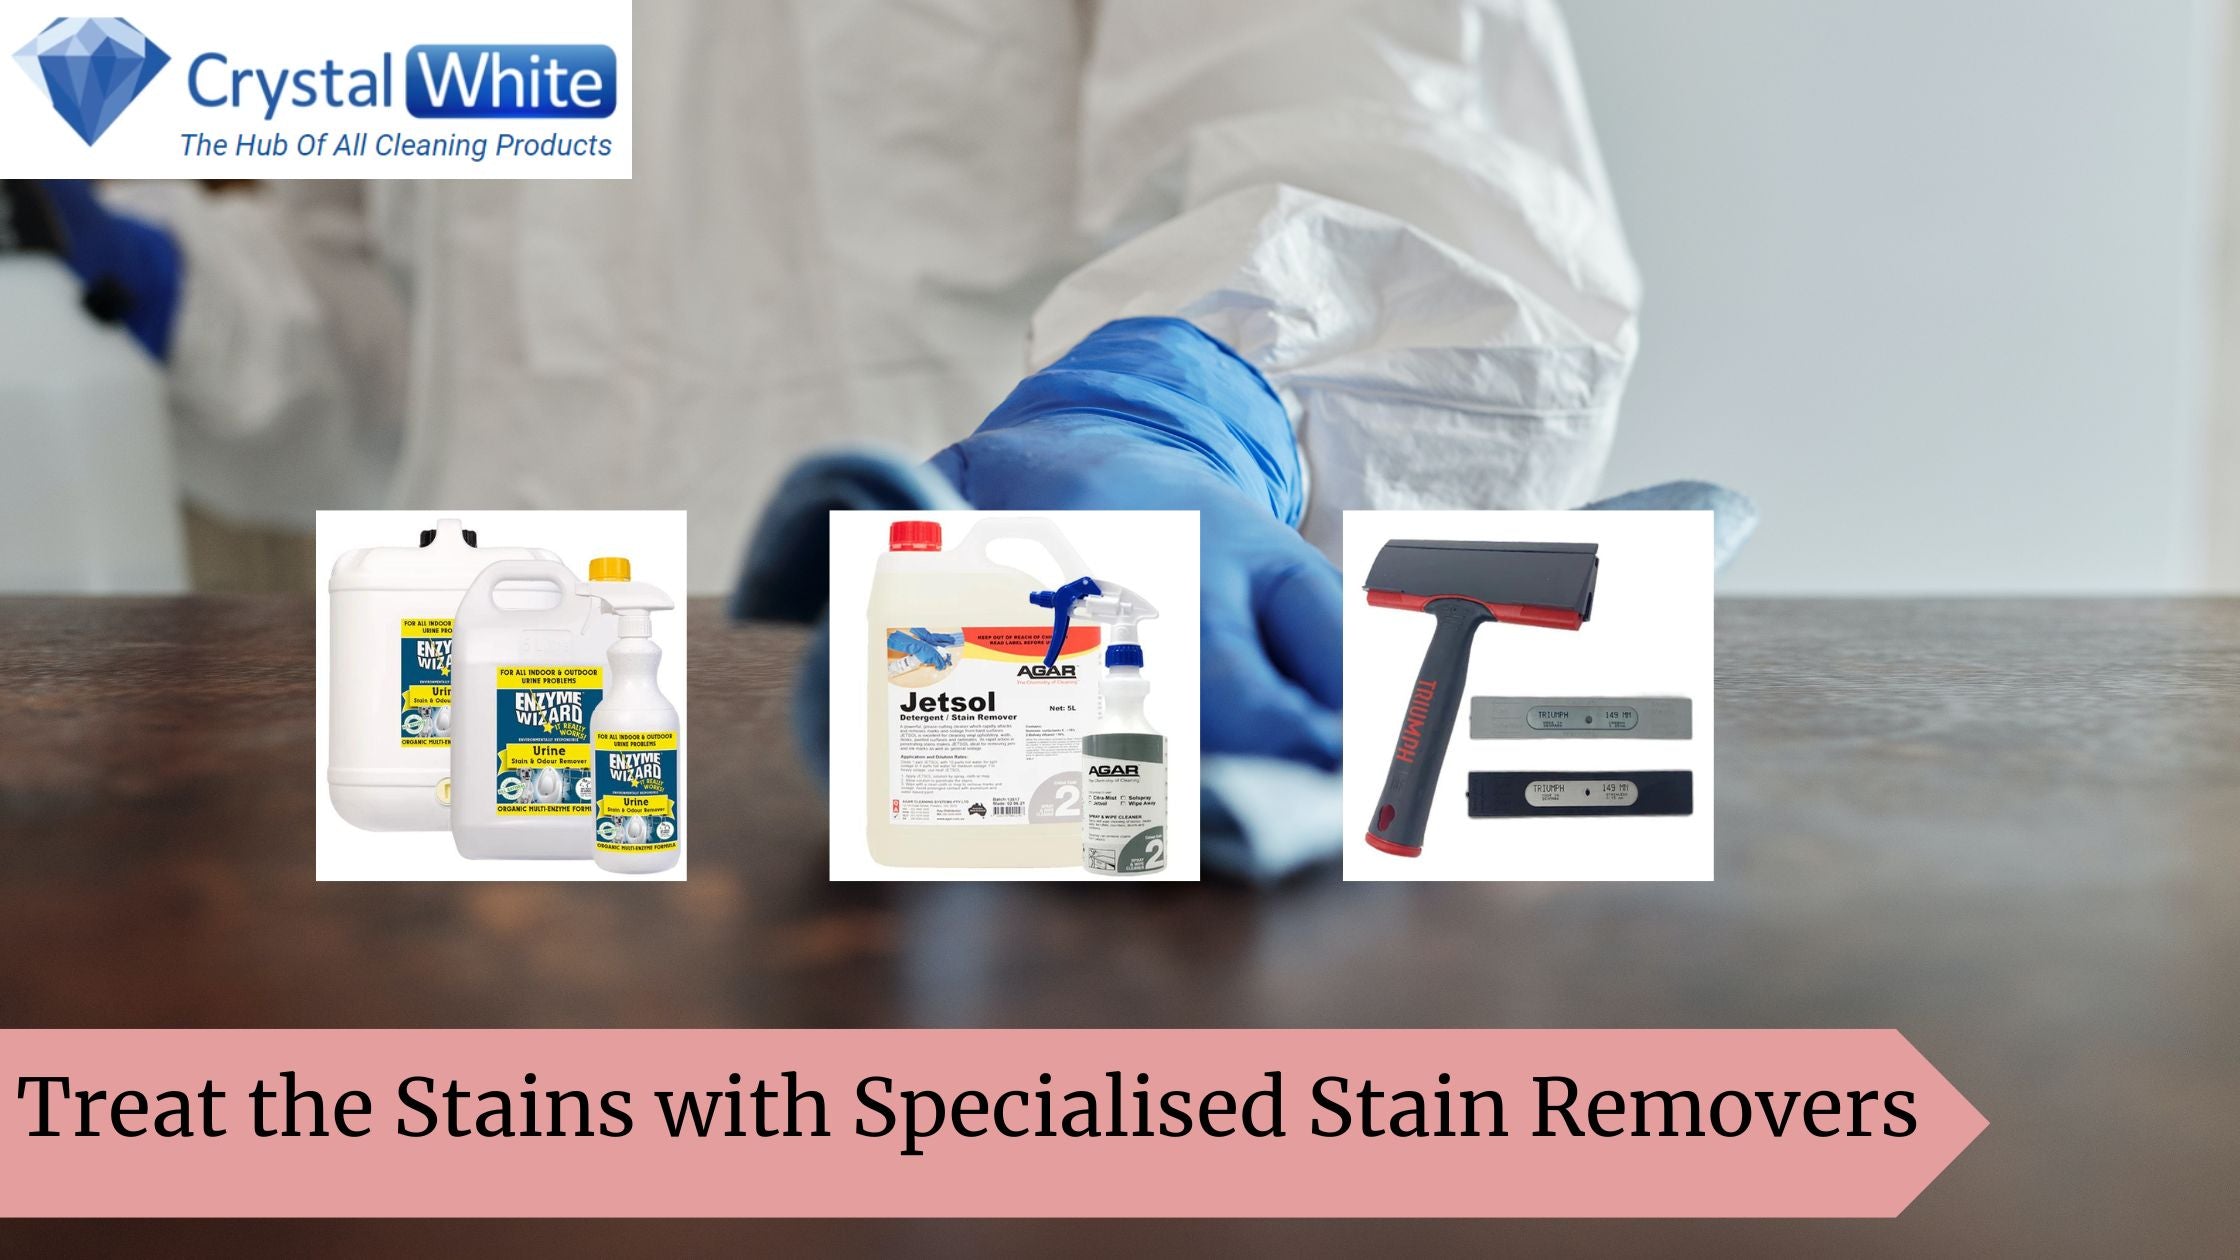 Treat the Stains with Crystal White Cleaning Supplies’ Specialised Stain Removers